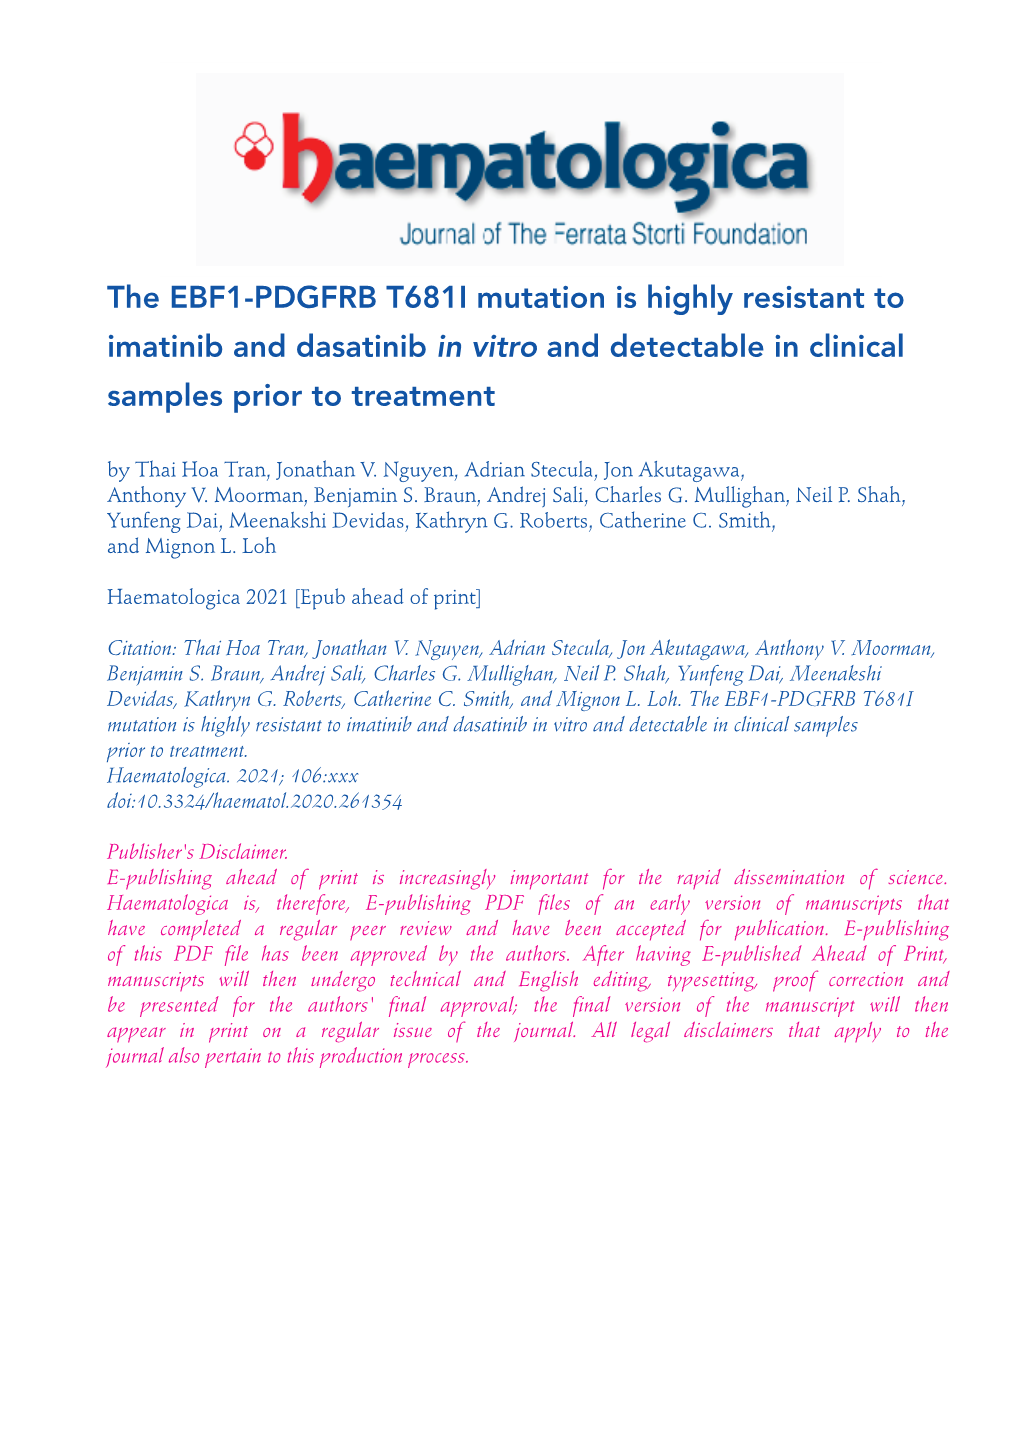 The EBF1-PDGFRB T681I Mutation Is Highly Resistant to Imatinib And